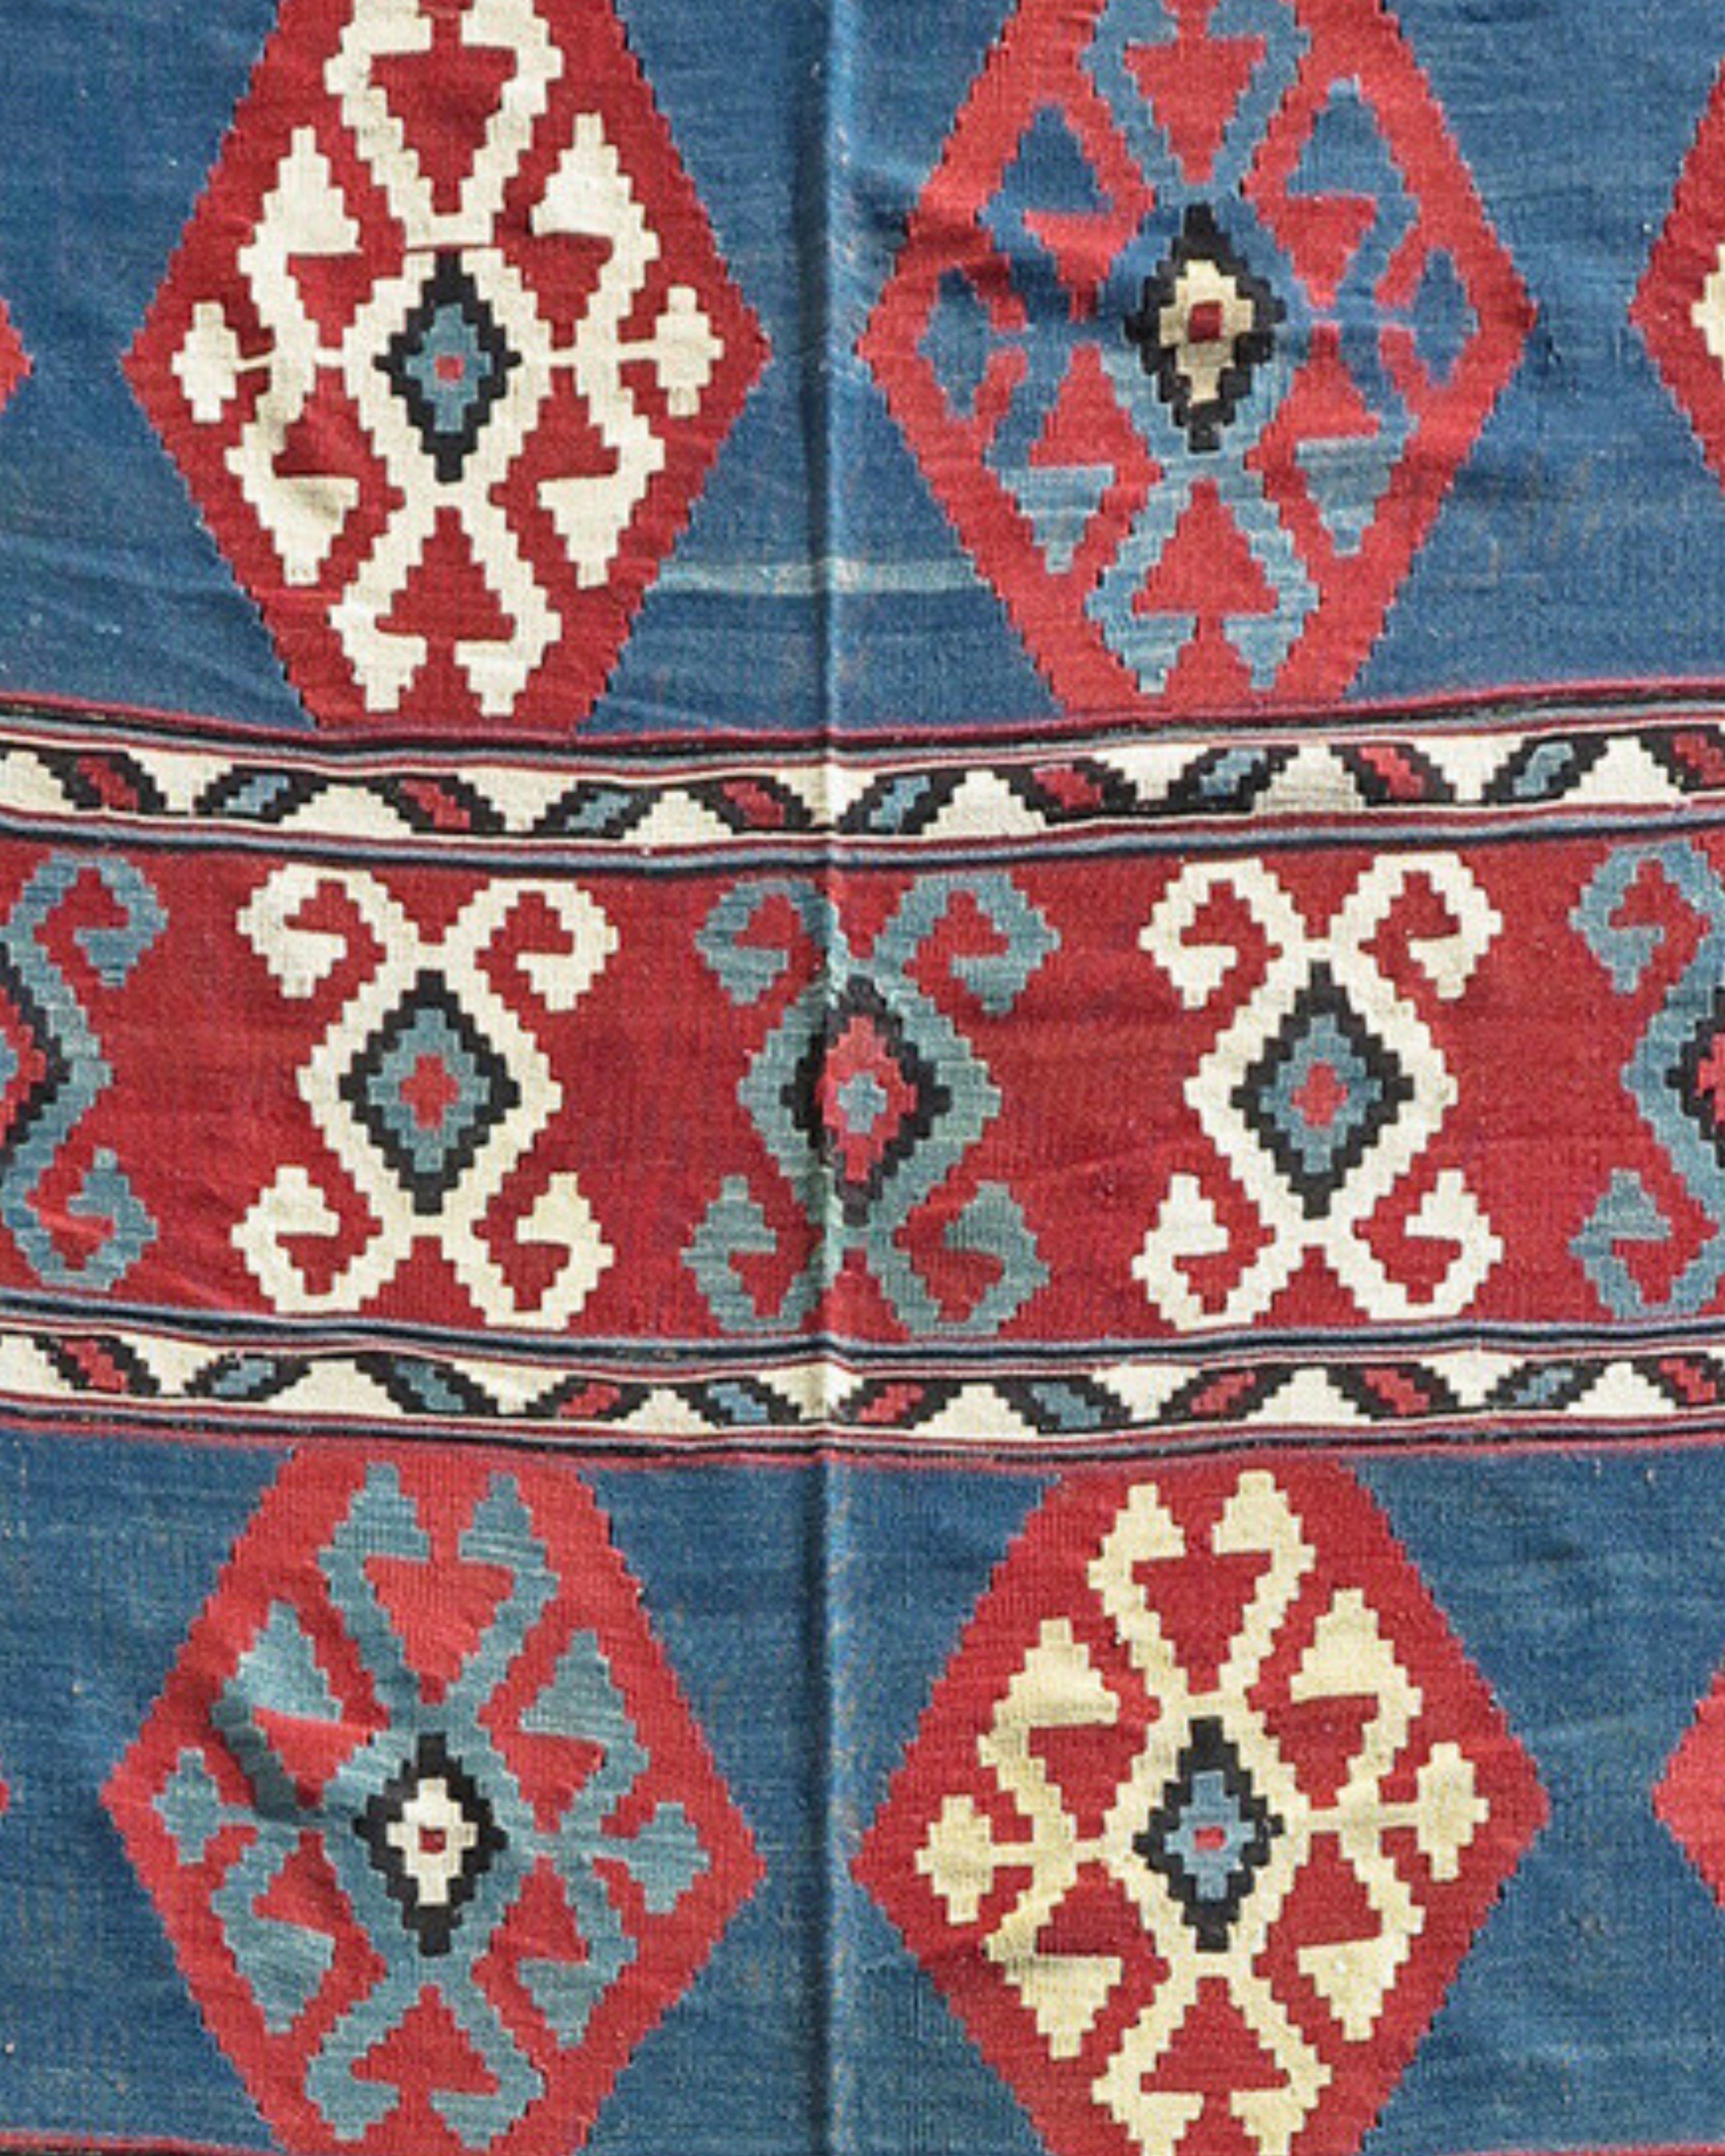 Antique Caucasian Kuba Kilim Rug, Late 19th Century

Combining bold geometry with pure color, this Kazak kilim from the South Caucasus draws alternating bands of blue and red. These bands are interspersed by thin white stripes with meandering